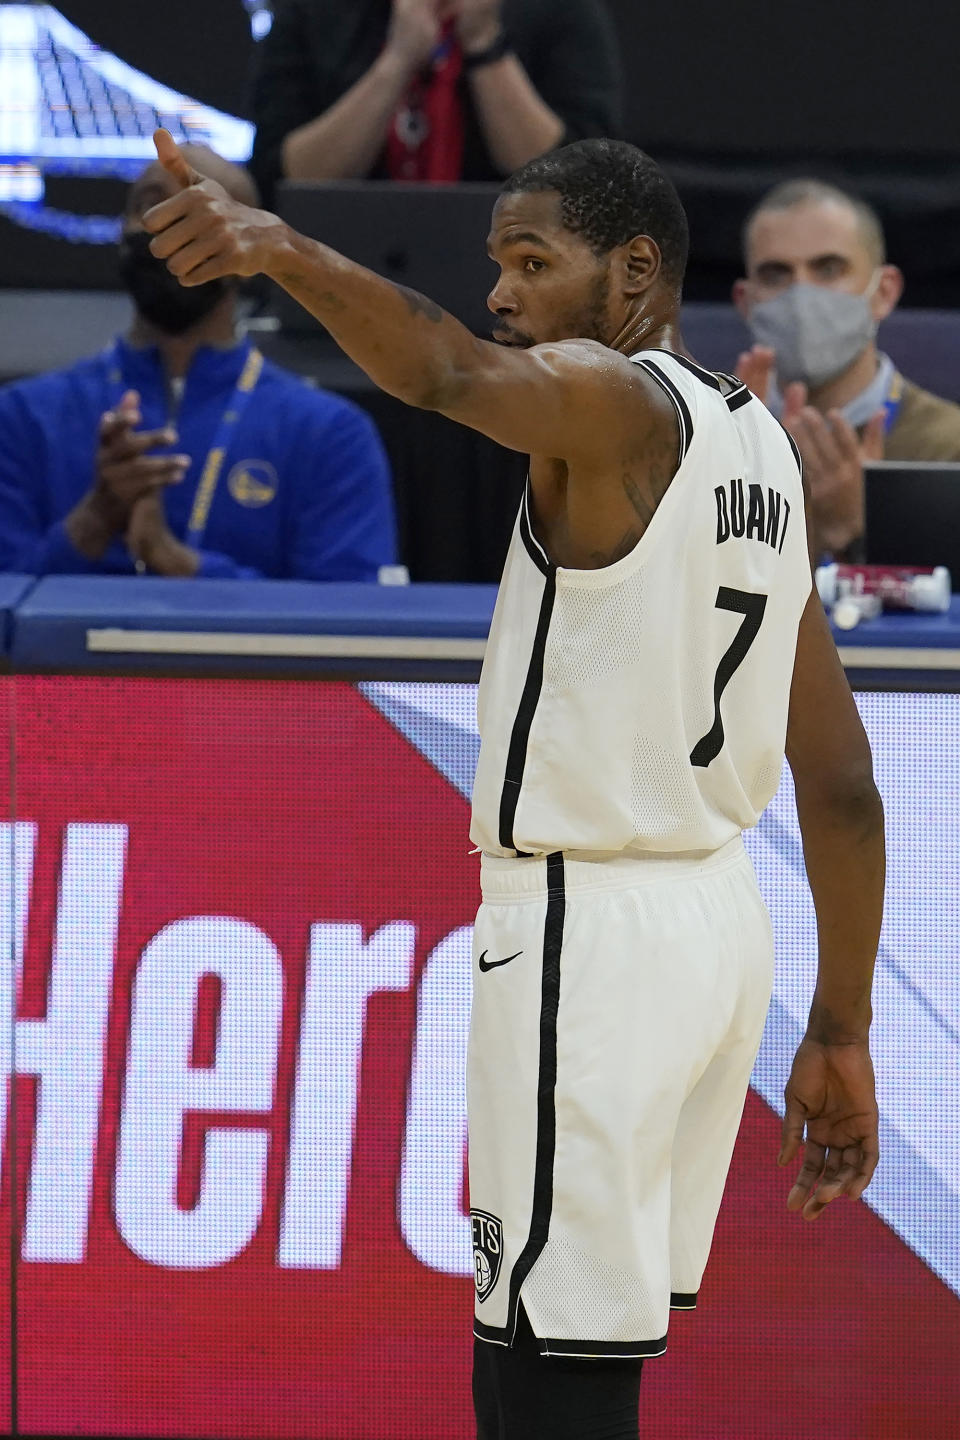 Brooklyn Nets forward Kevin Durant gestures after a video tribute to him was played during the first half of the Nets' NBA basketball game against the Golden State Warriors in San Francisco, Saturday, Feb. 13, 2021. (AP Photo/Jeff Chiu)